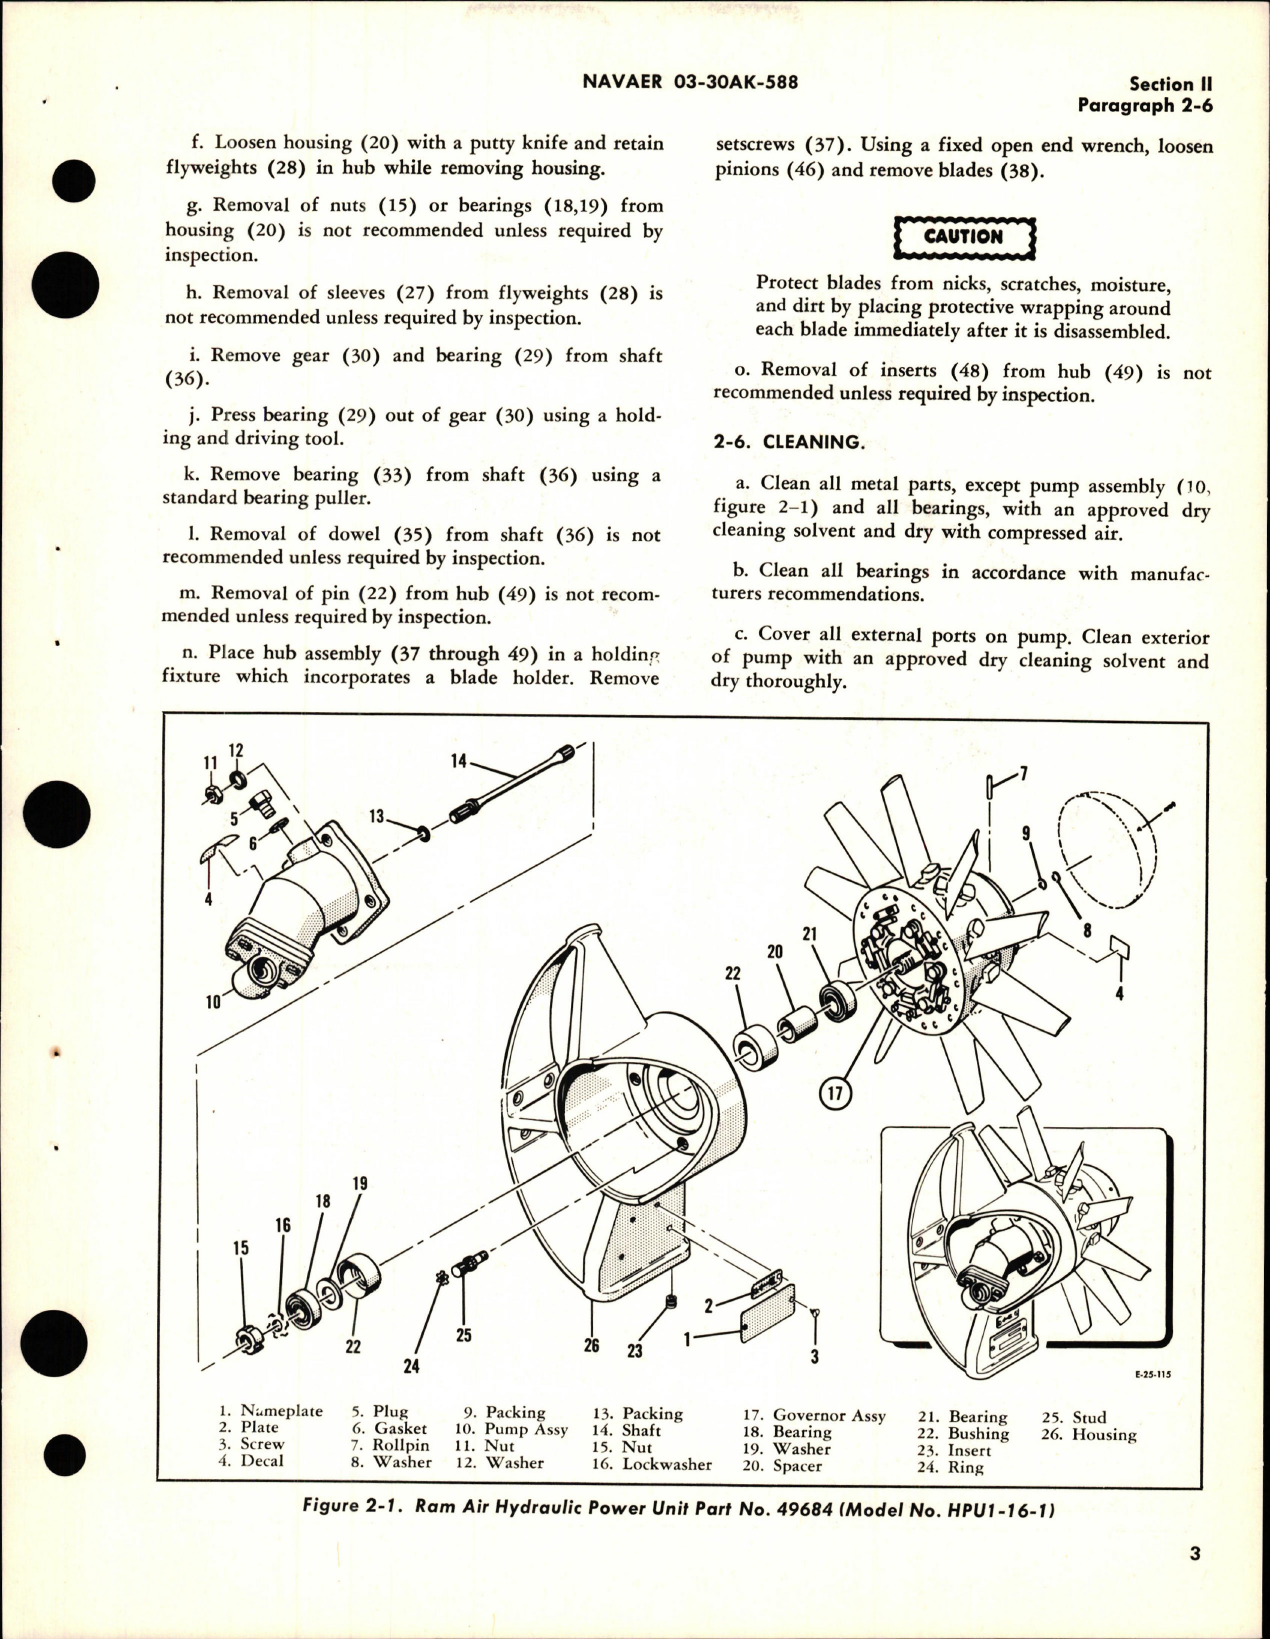 Sample page 7 from AirCorps Library document: Overhaul Instructions for Ram Air Hydraulic Power Unit - Part 49684 - Model HPU1-16 